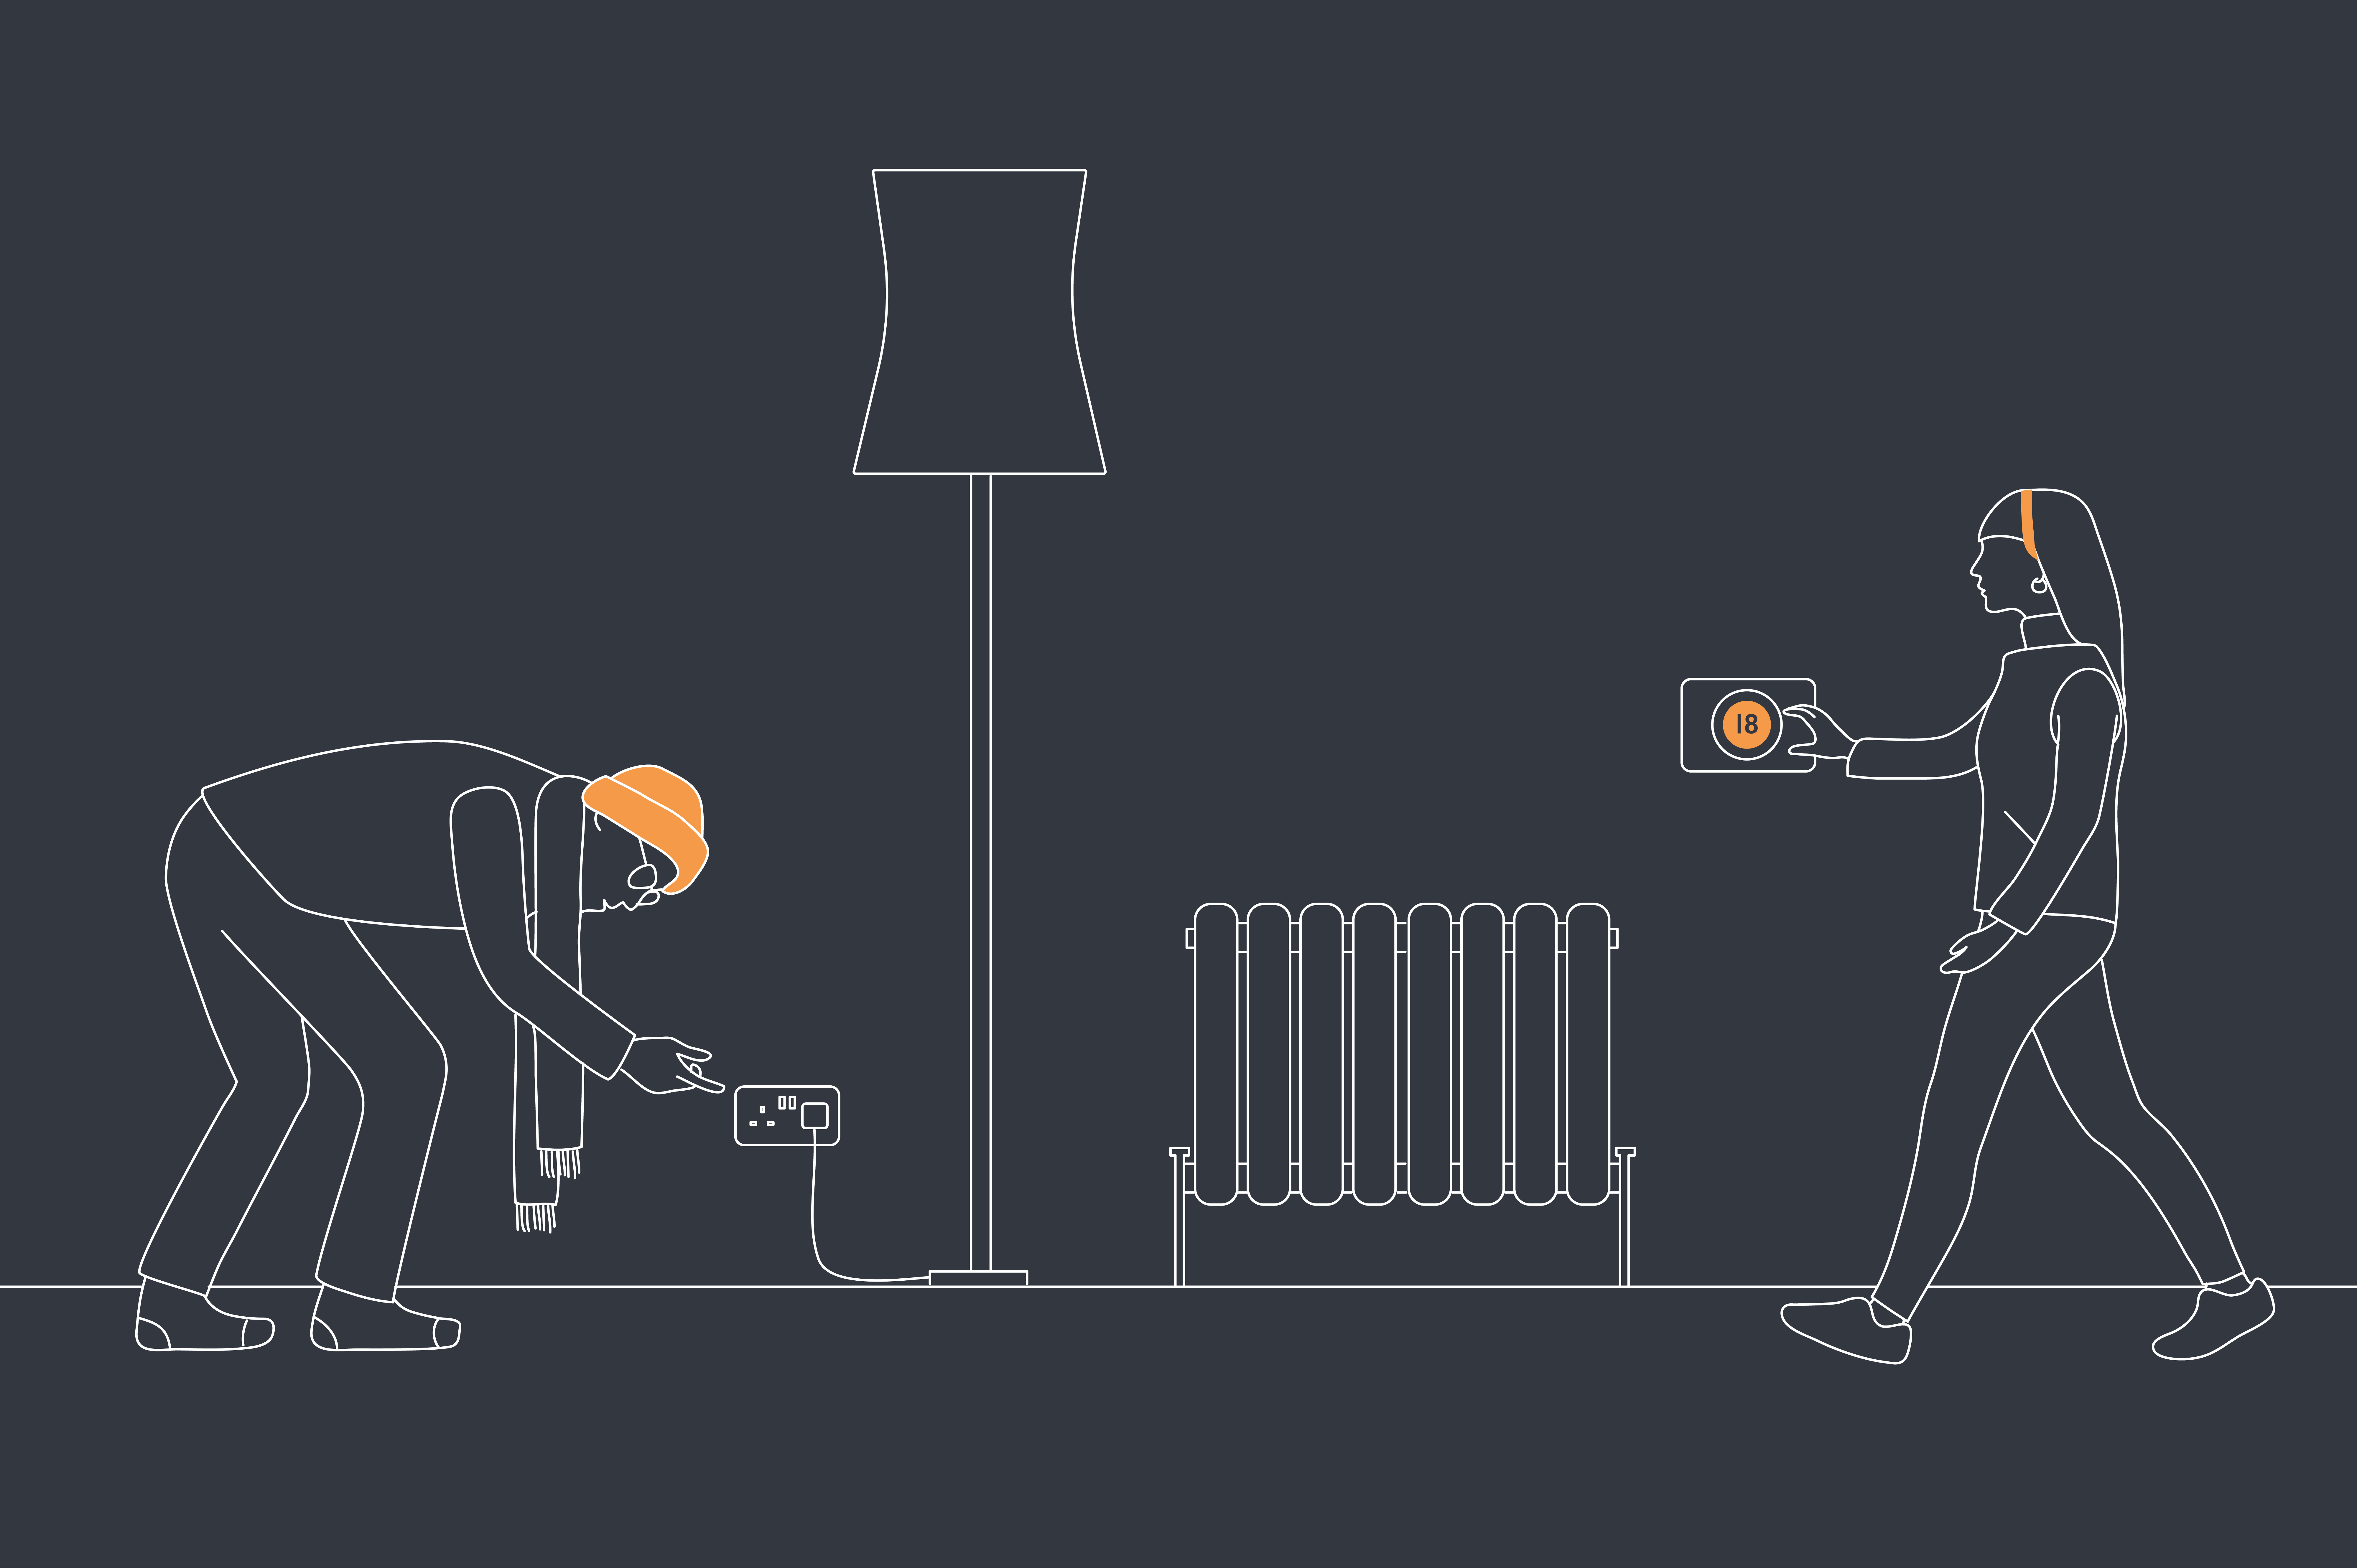 An illustration of someone using a smart meter within their home to reduce energy